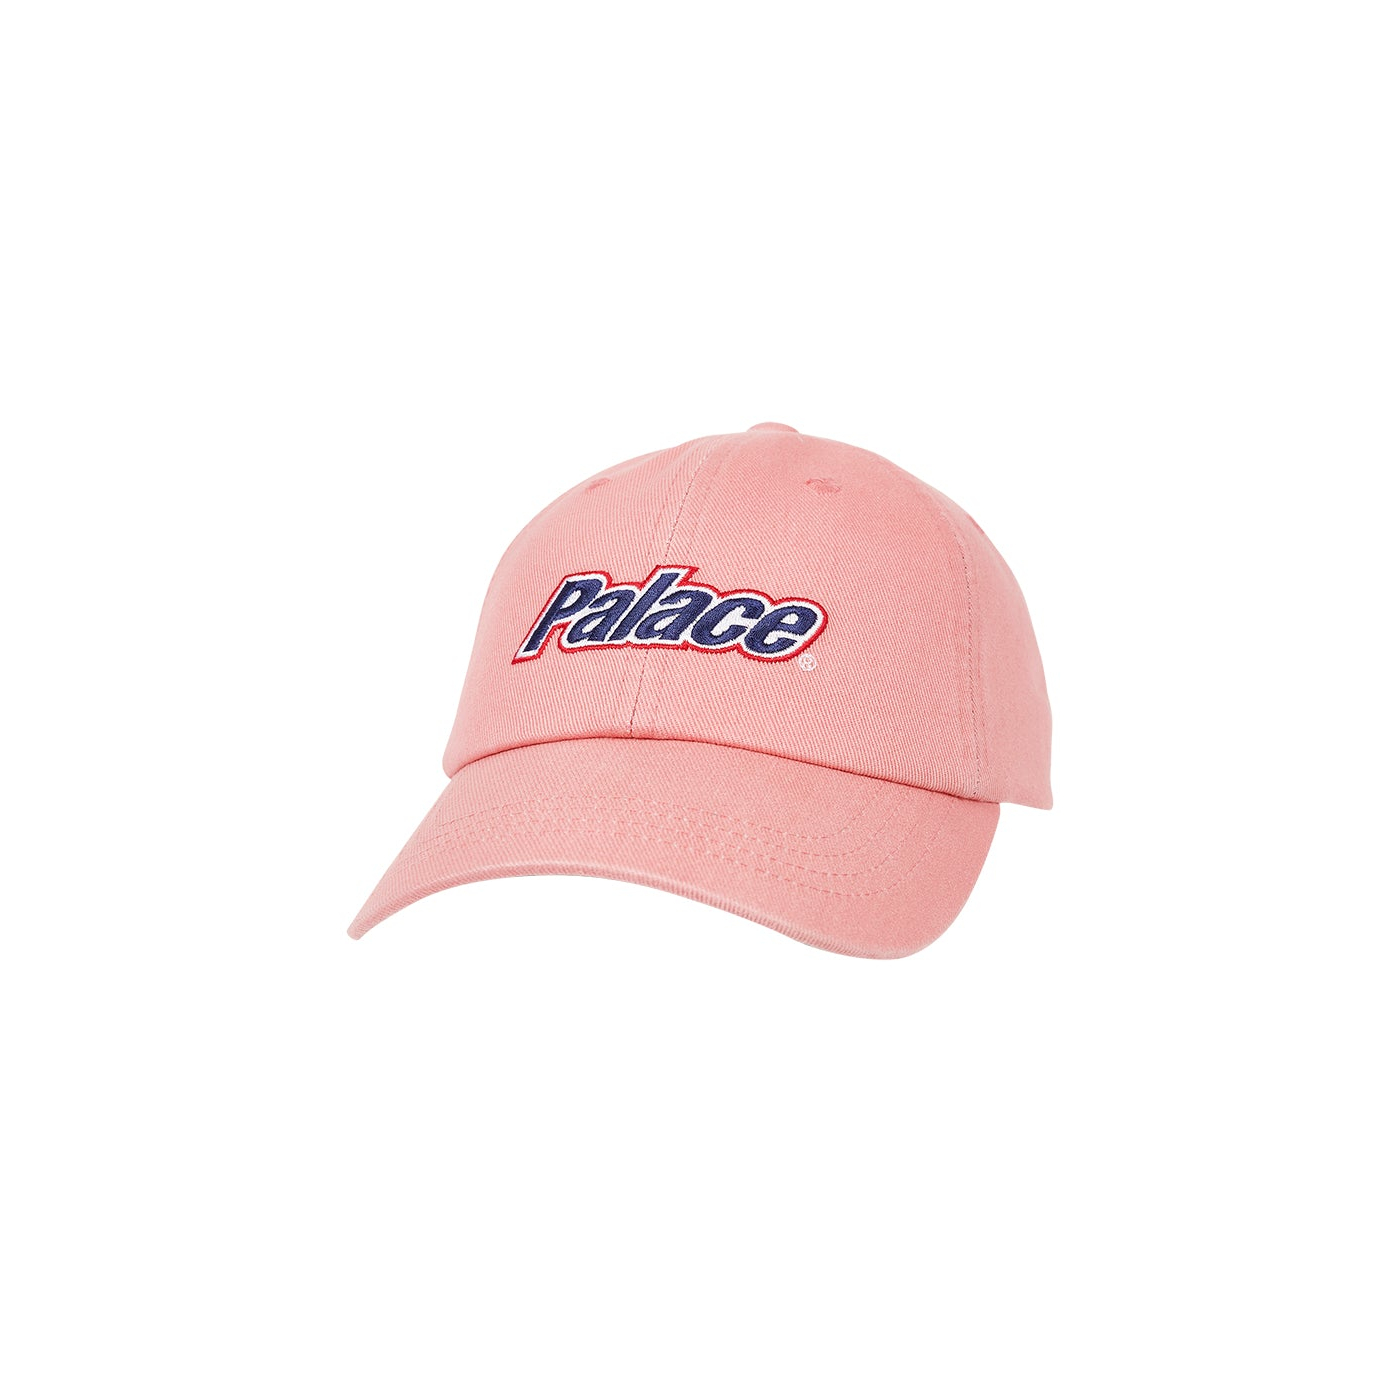 Thumbnail LOWERCASE WASHED DENIM 6-PANEL PINK one color